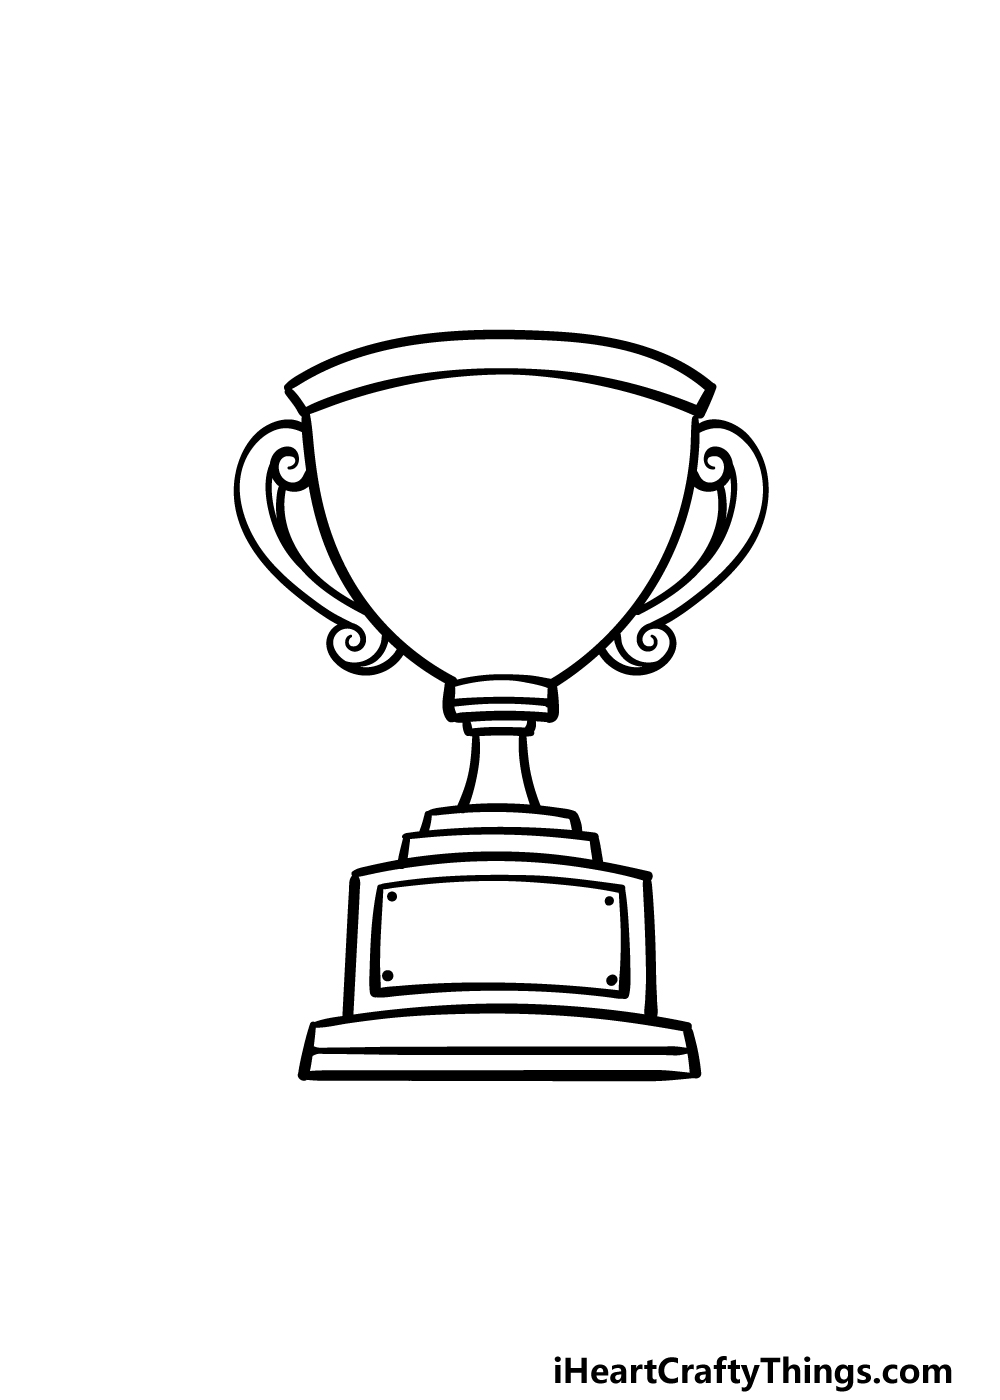 how to draw a trophy step 4